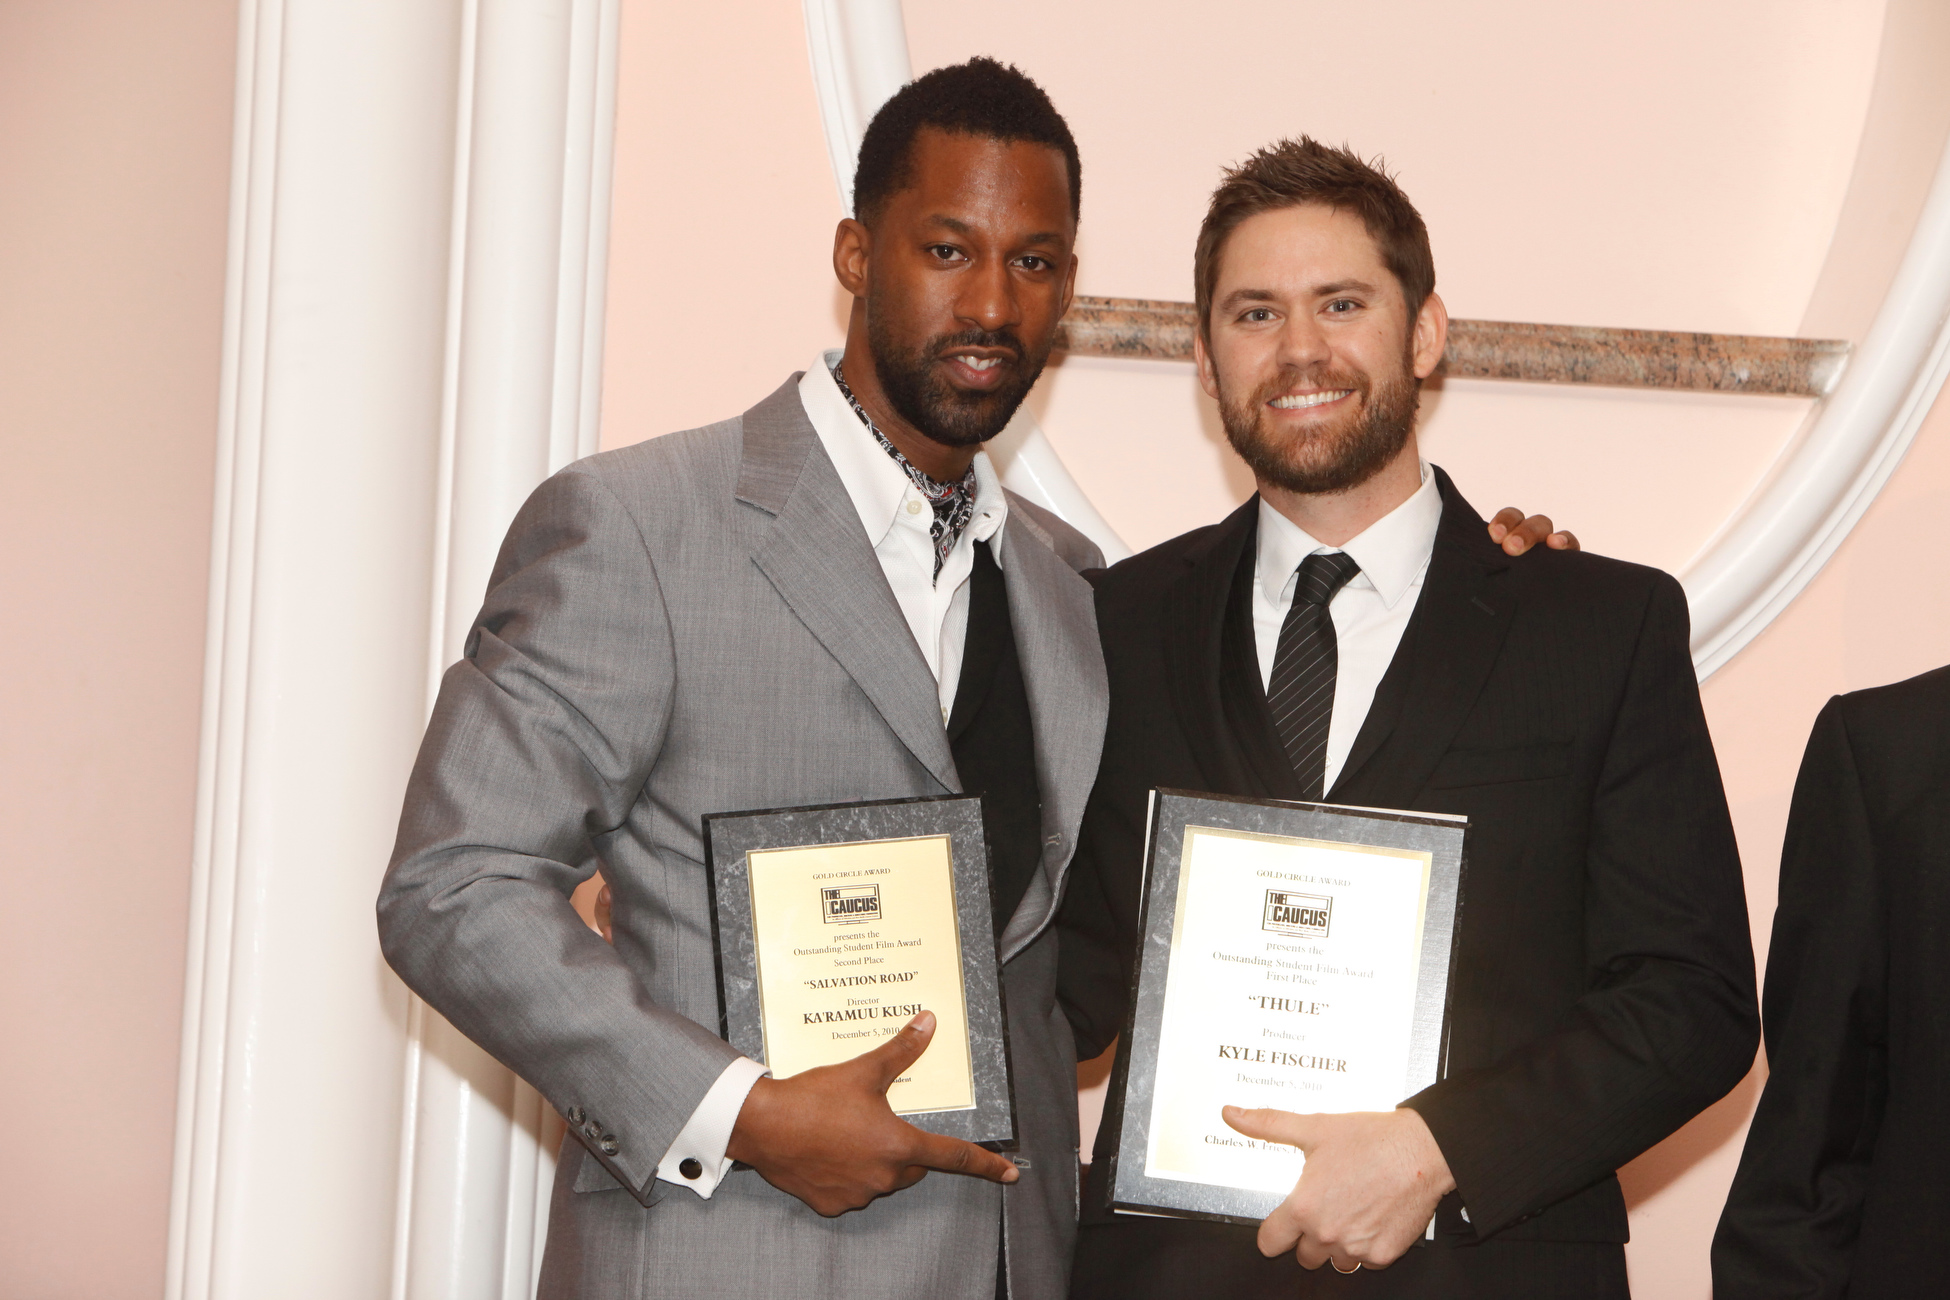 kA' and Kyle Fischer at The Caucus Awards, Beverly Hills Hotel, 2010